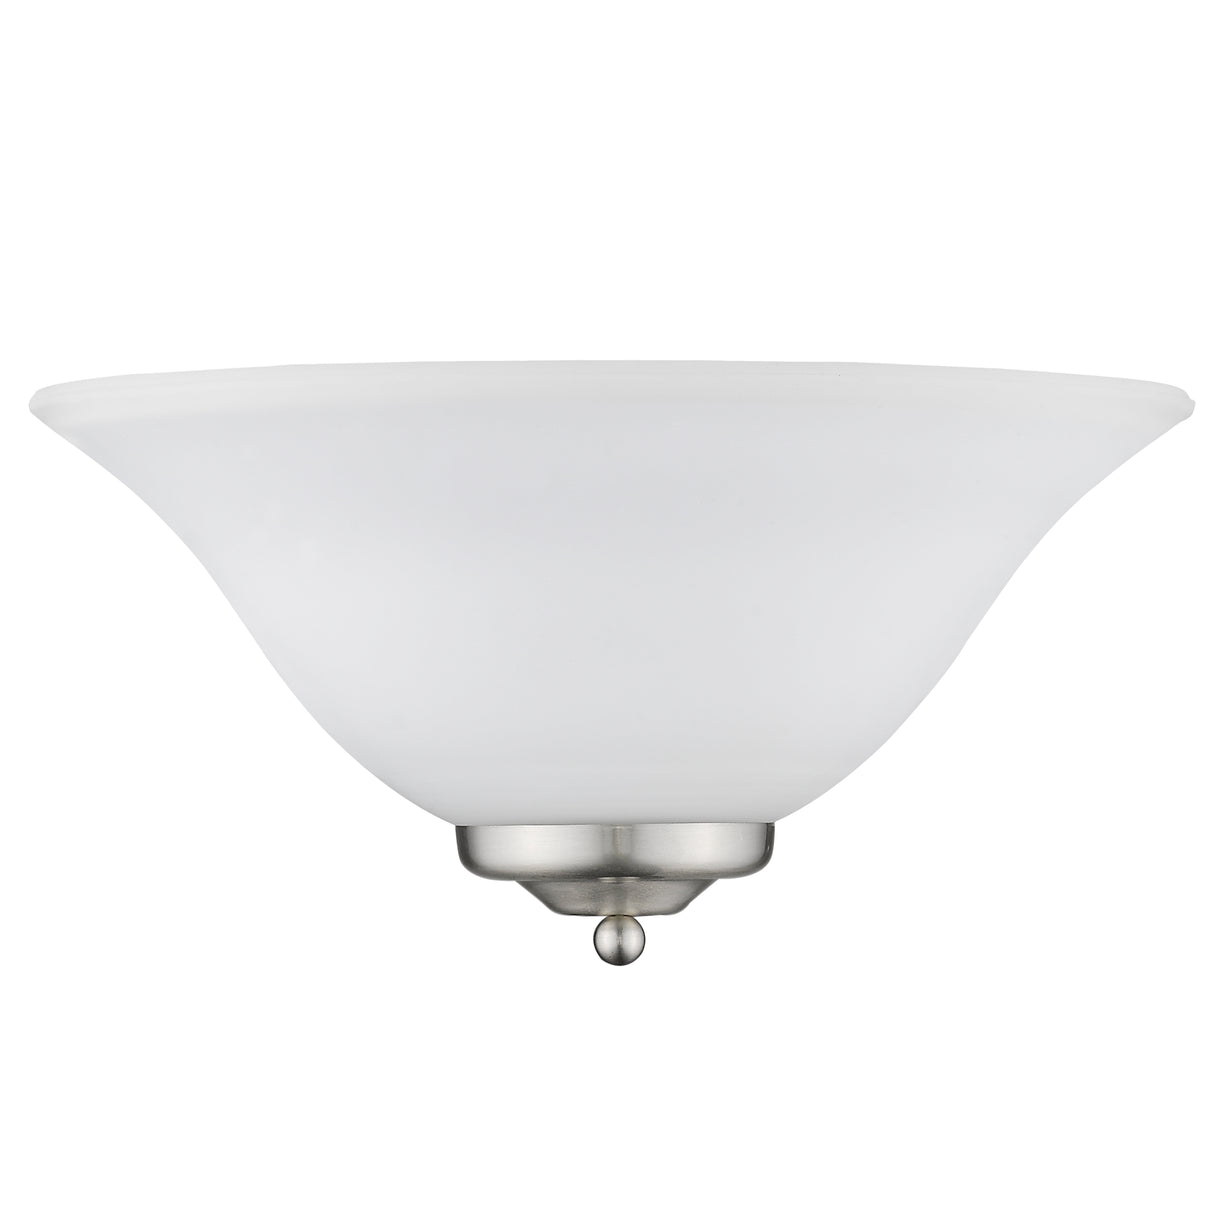 Multi-Family 1 Light Wall Sconce in Pewter with Opal Glass